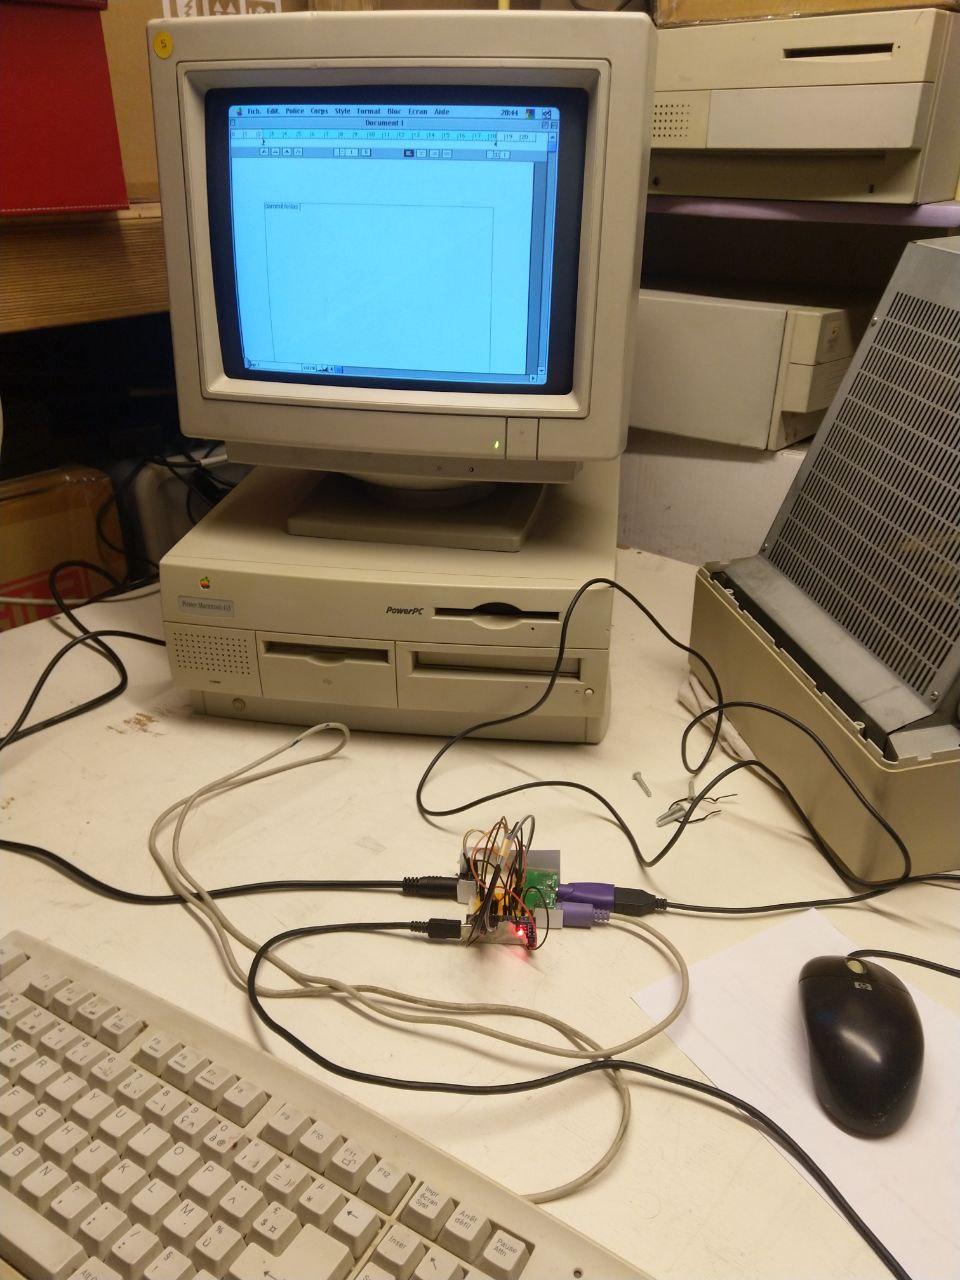 I retrobright'd this powermac and it looks pretty darn good now